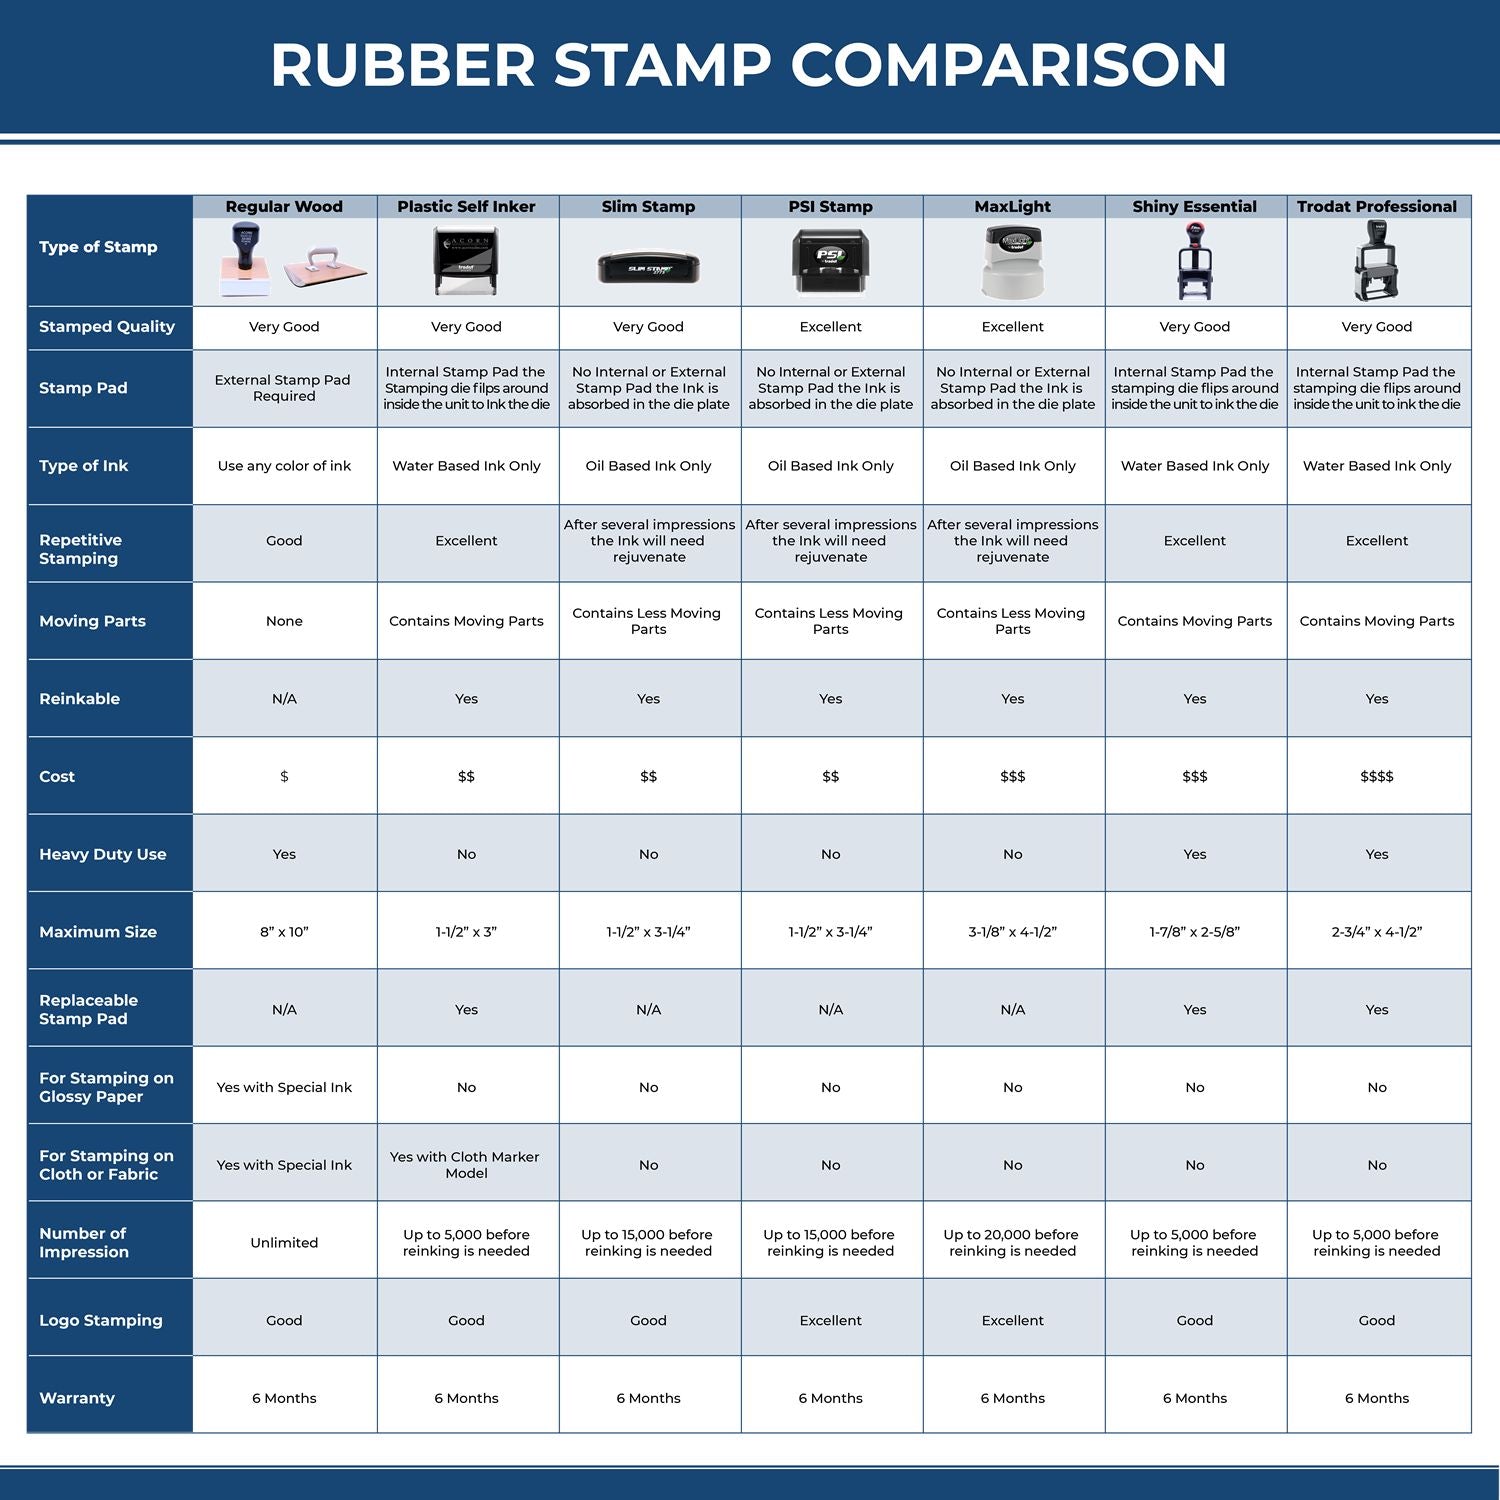 A comparison chart for the different types of mount models available for the Delaware Landscape Architectural Seal Stamp.